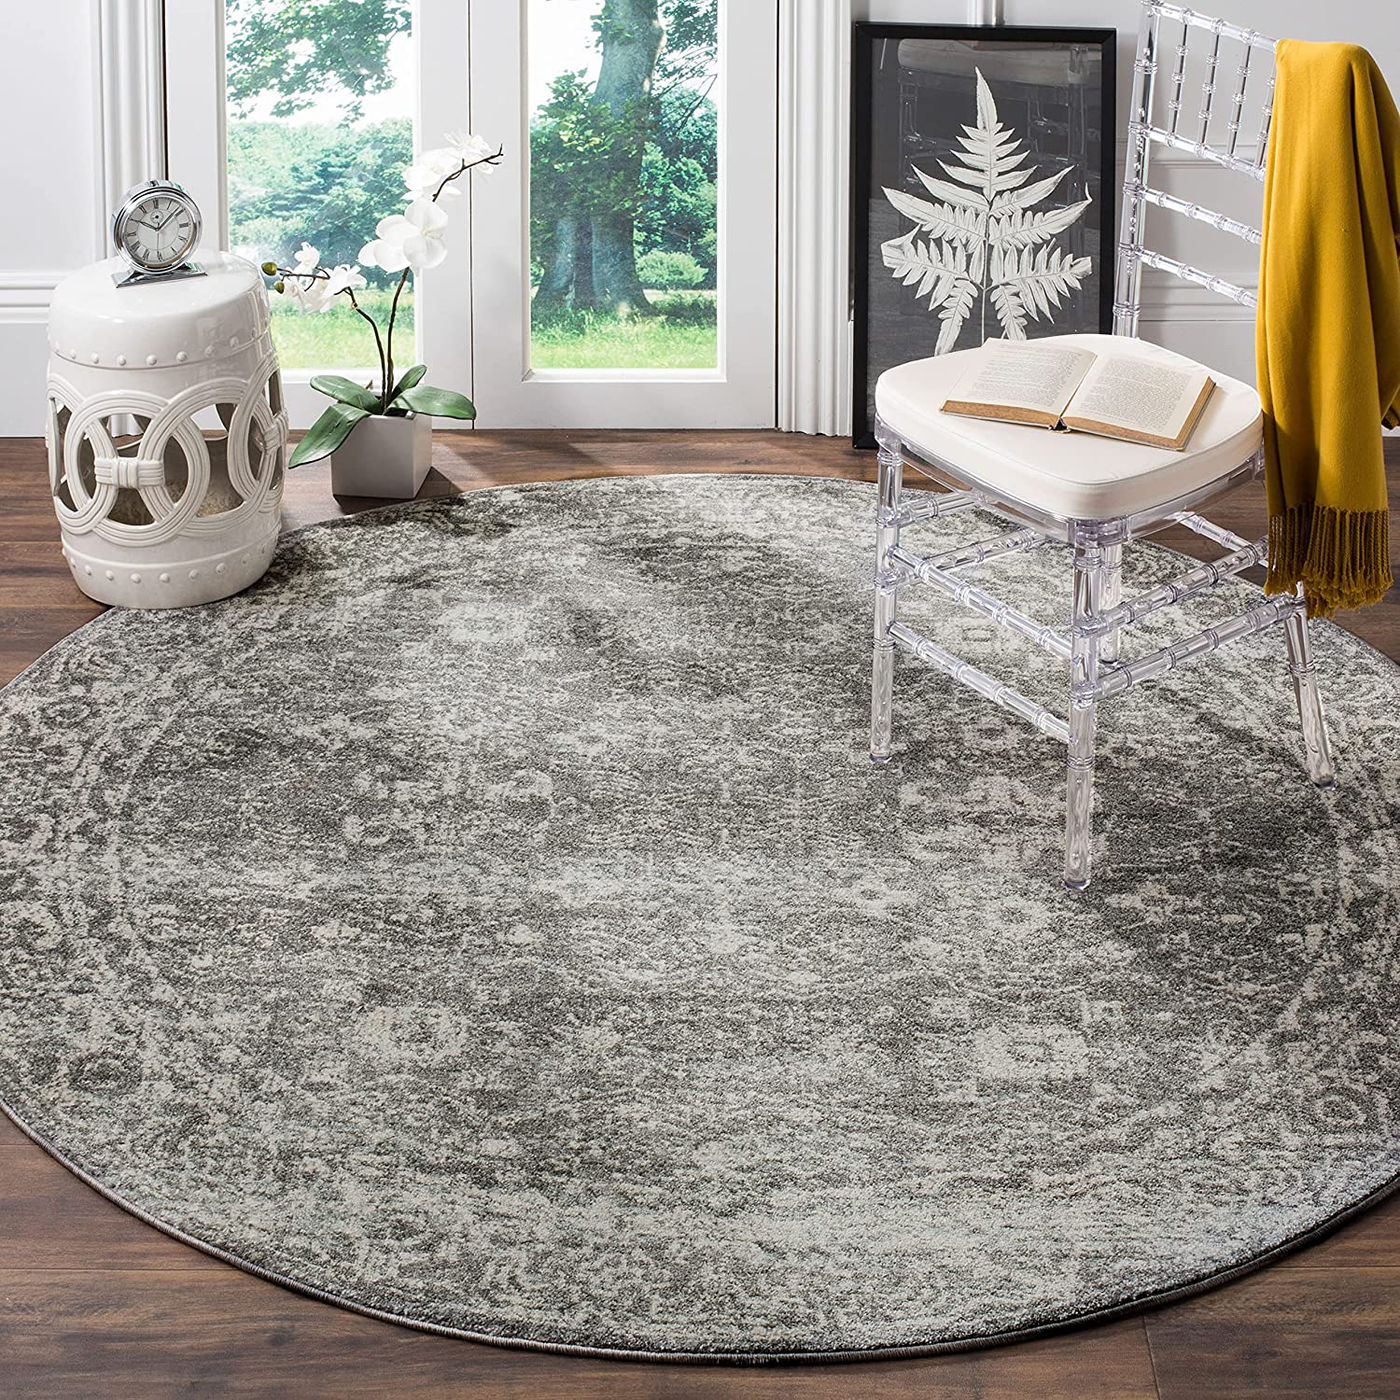 Safavieh Evoke Collection EVK270S Shabby Chic Distressed Non-Shedding Stain Resistant Living Room Bedroom Area Rug, 3' x 3' Round, Grey / Ivory